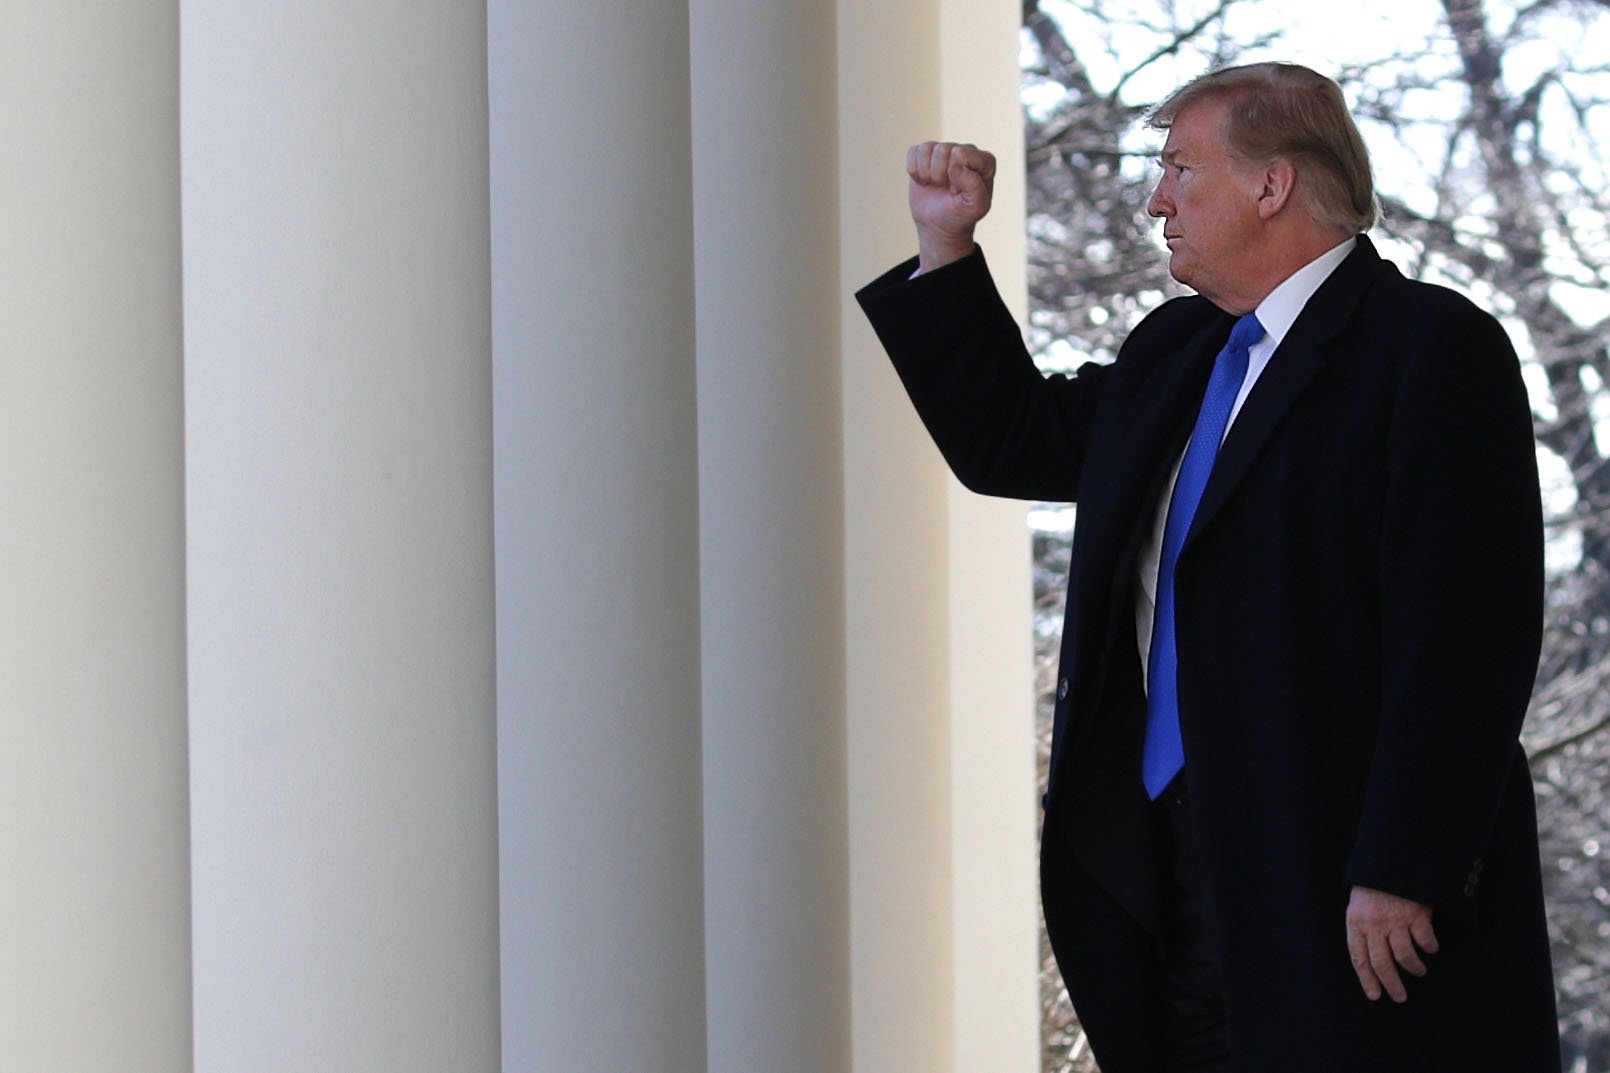 President Donald Trump waving at the crowd prior to the national emergency declaration | Photo: Getty Images